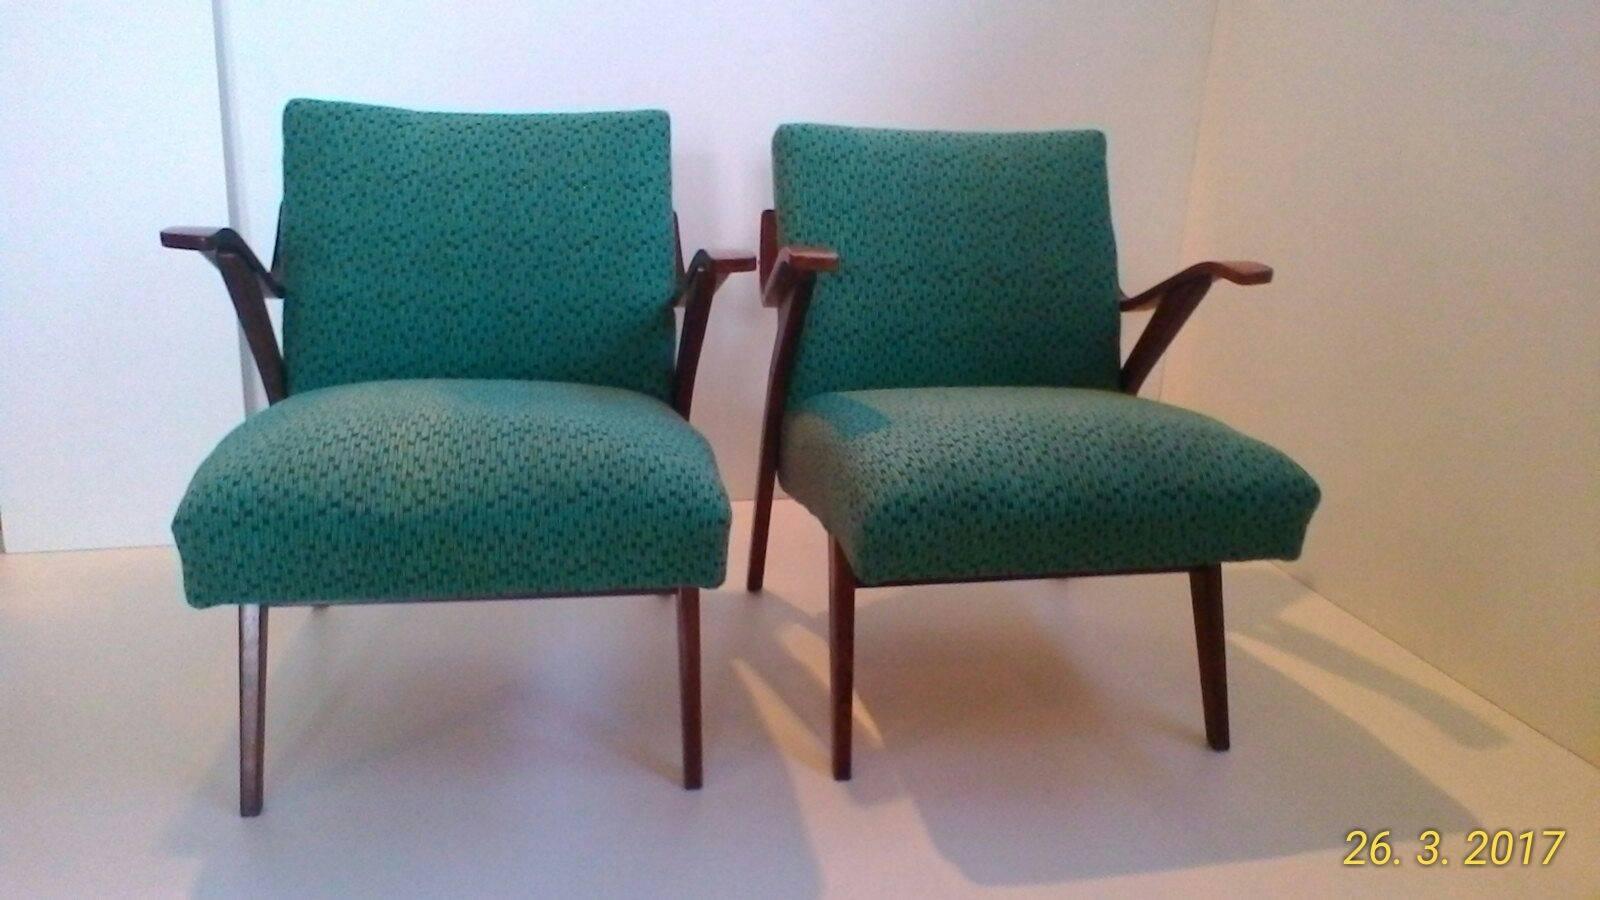 A pair of armchairs in Brussels style. The armchairs were produced by Tatra Pravenec, Czechoslovakia in 1960s during the famous 'Brussels era'. Very good original condition.